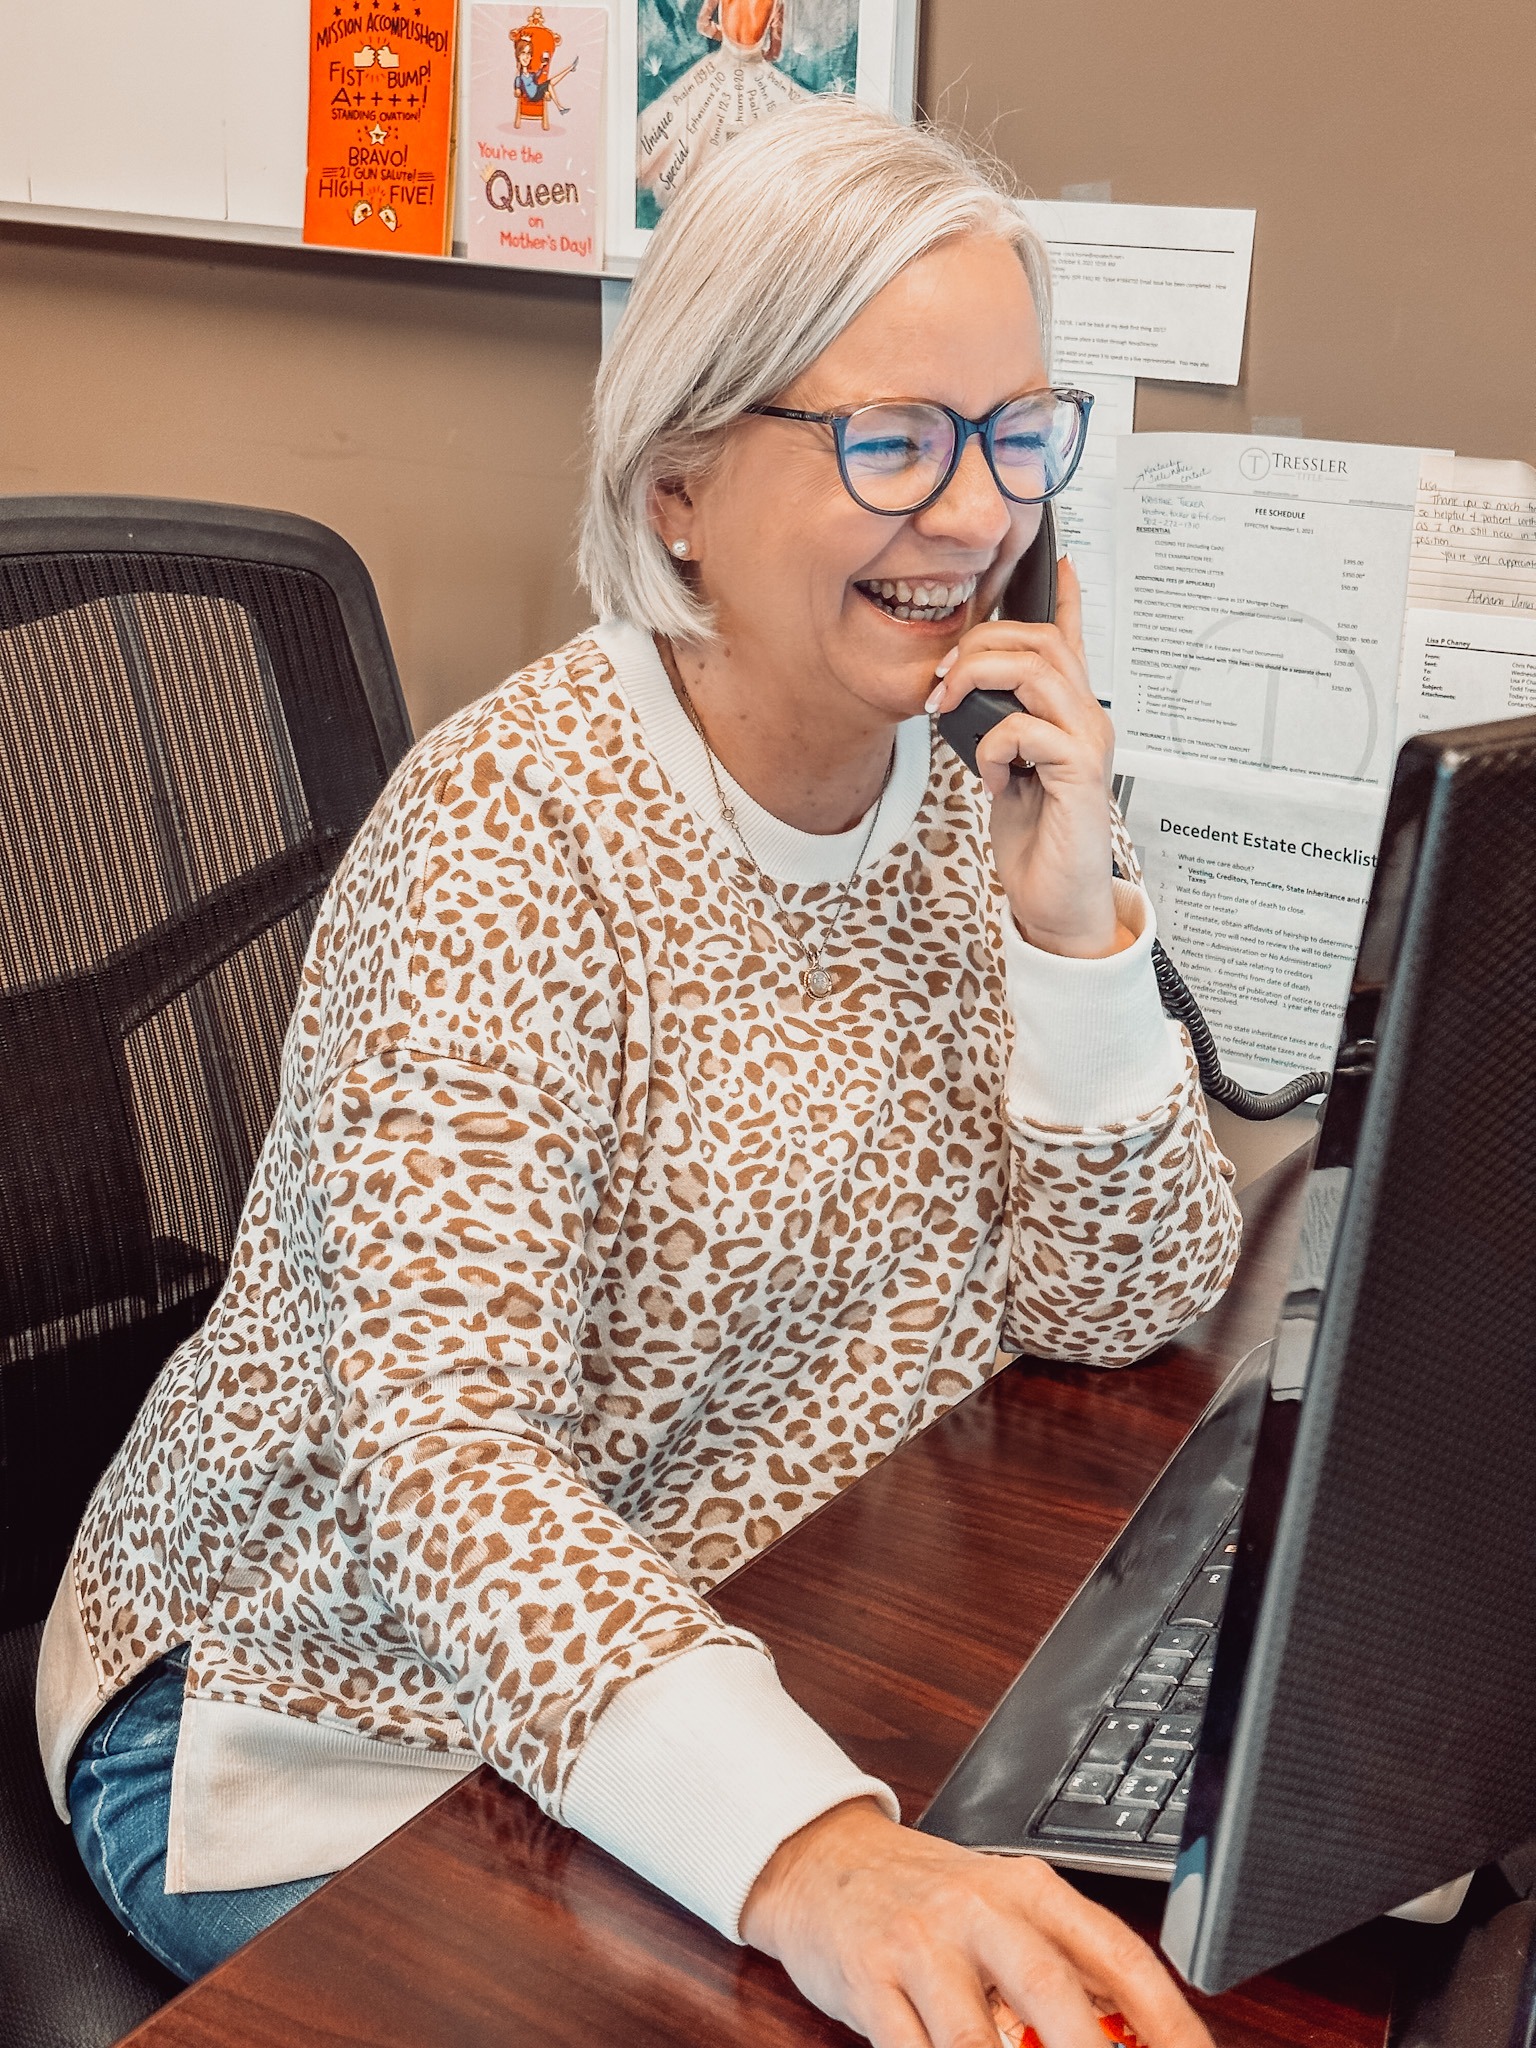 Lisa Chaney smiling while talking on the phone with a client at her desk on the computer